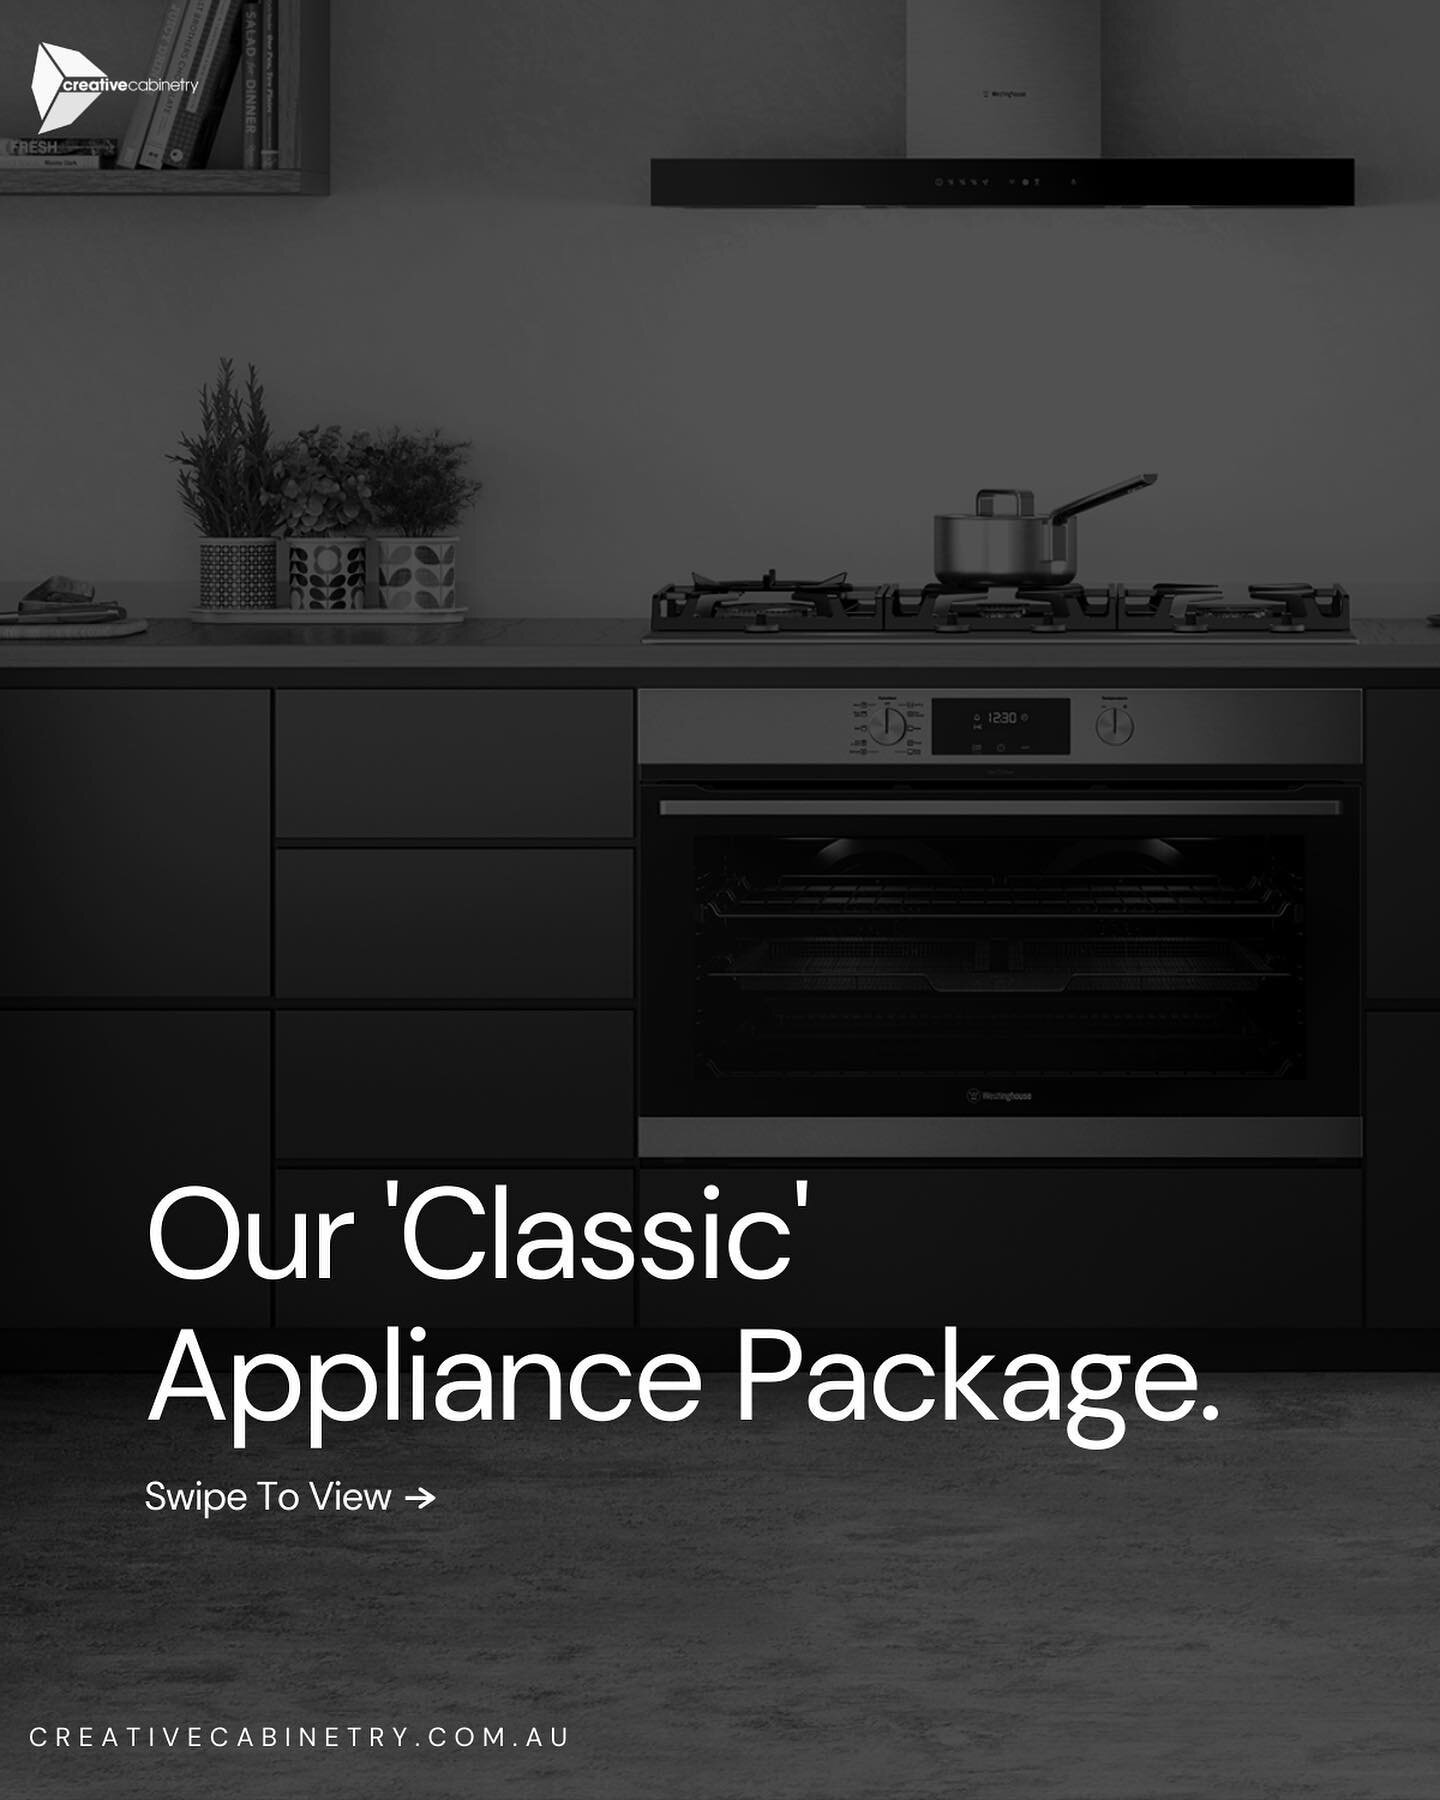 Our &lsquo;Classic&rsquo; Appliance Package SWIPE &gt;&gt;&gt;&gt;
-
The Classic Range is our latest appliance package featuring options from @westinghouseappliancesau &amp; @omegaappliances_aus, it ensures your kitchen is stylish and functional at a